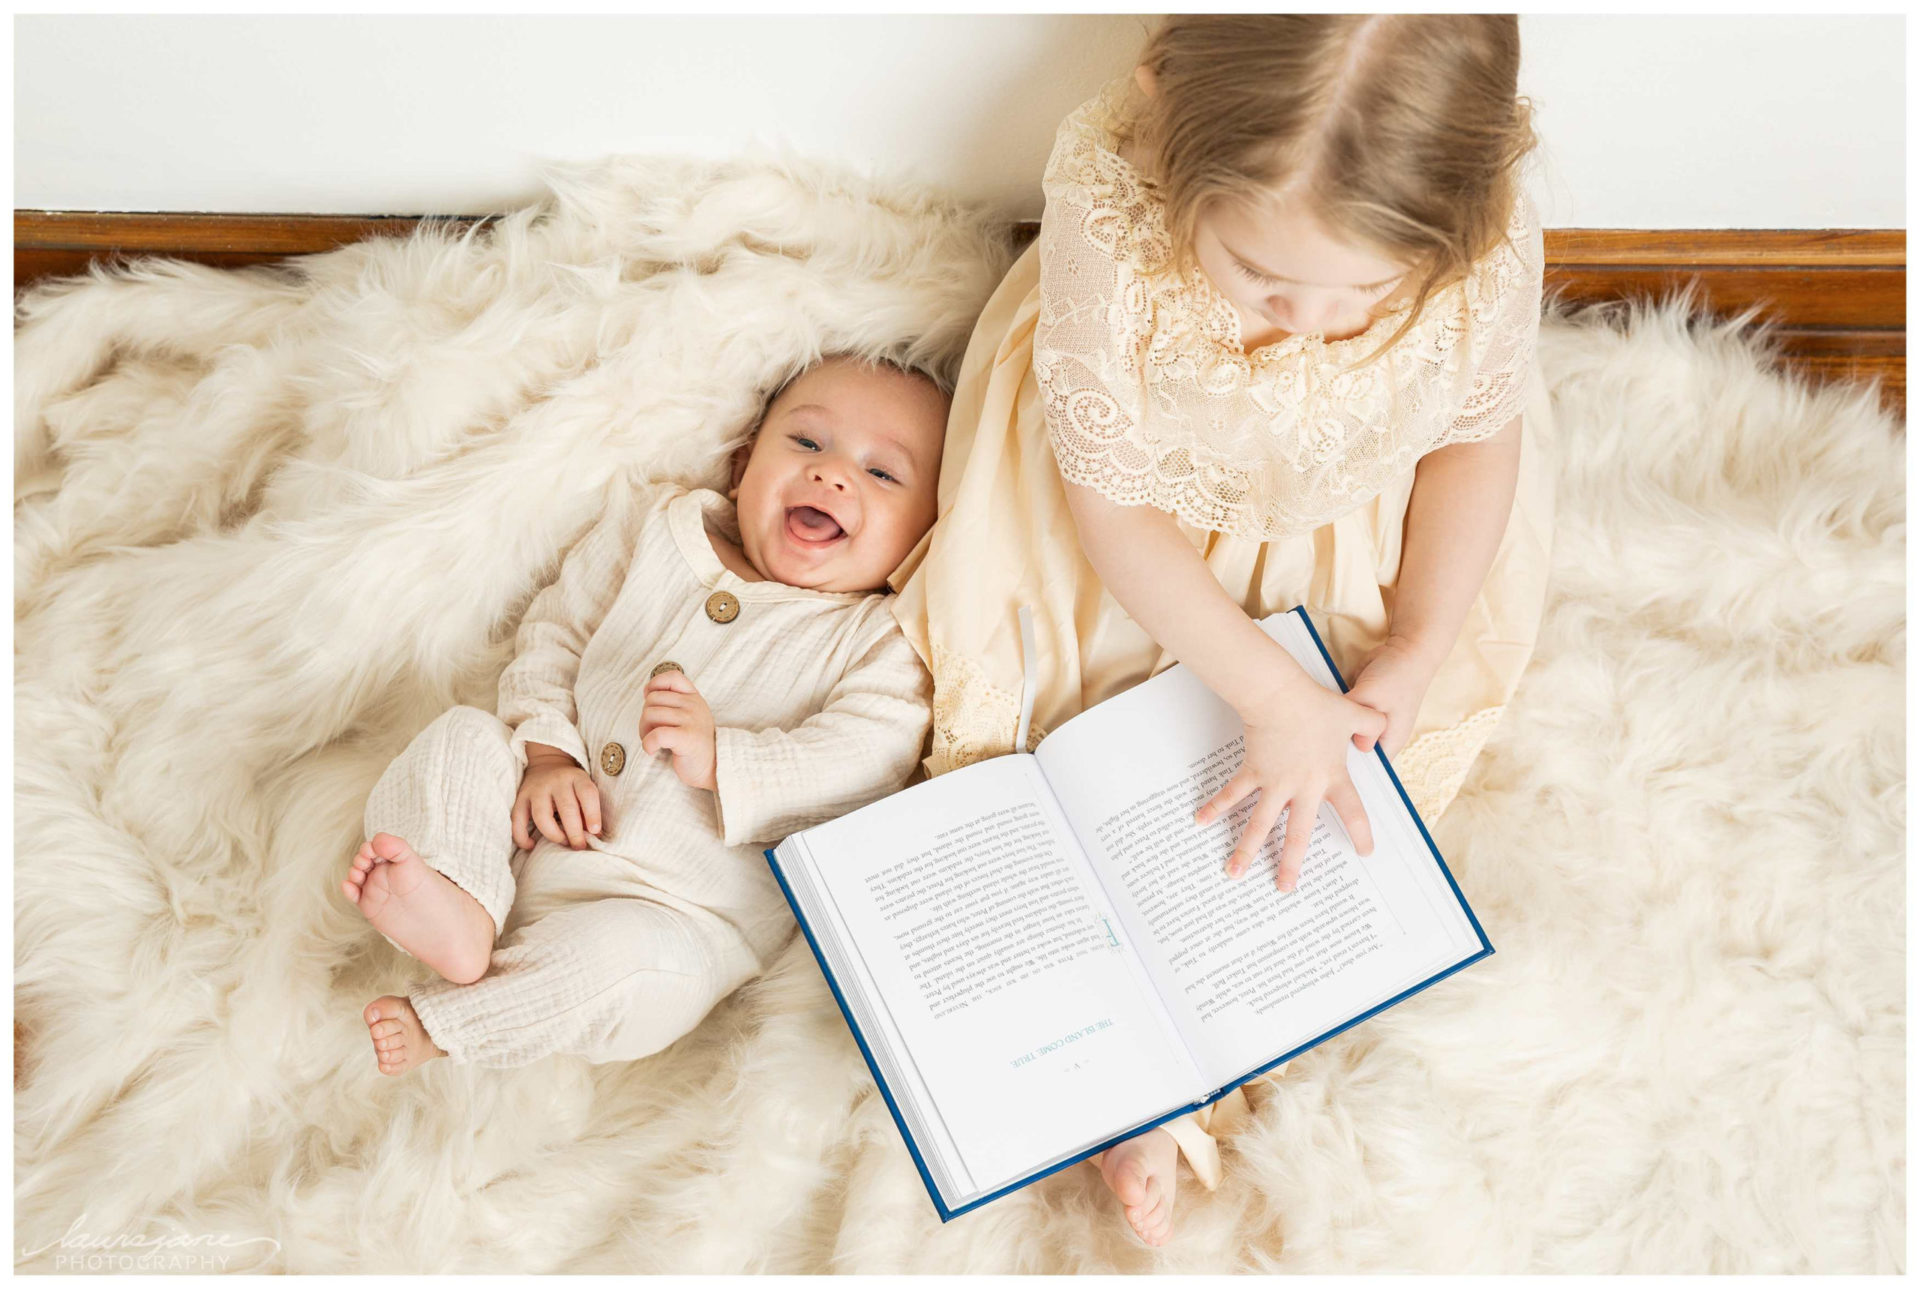 Children Portraits with Storybooks